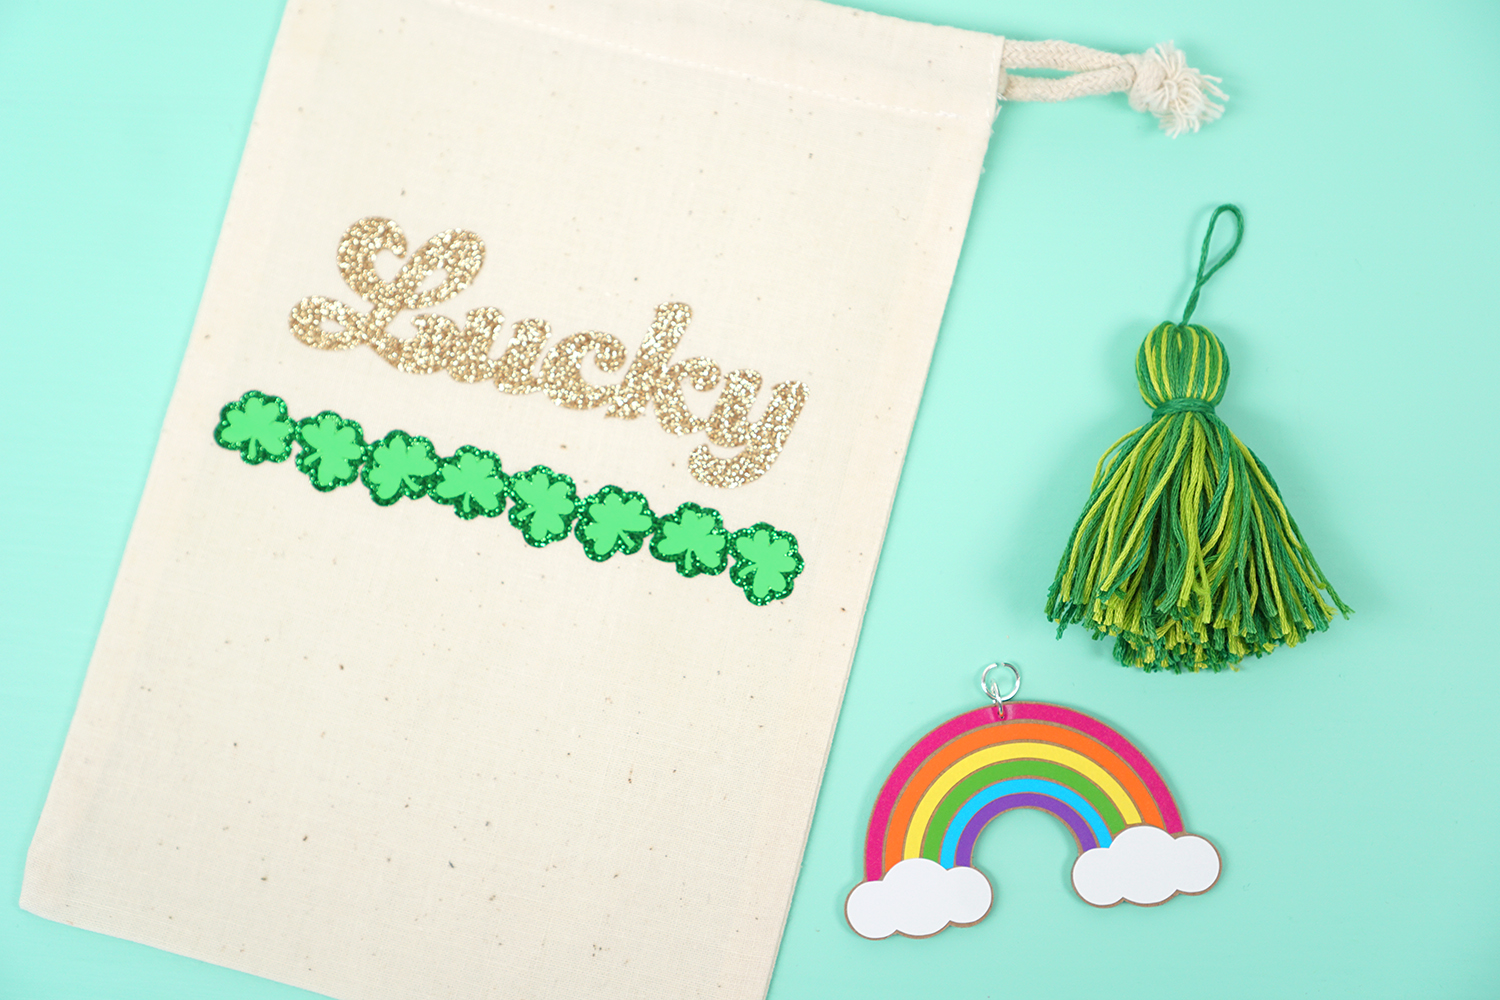 tassel and rainbow charm placed next to treat bag